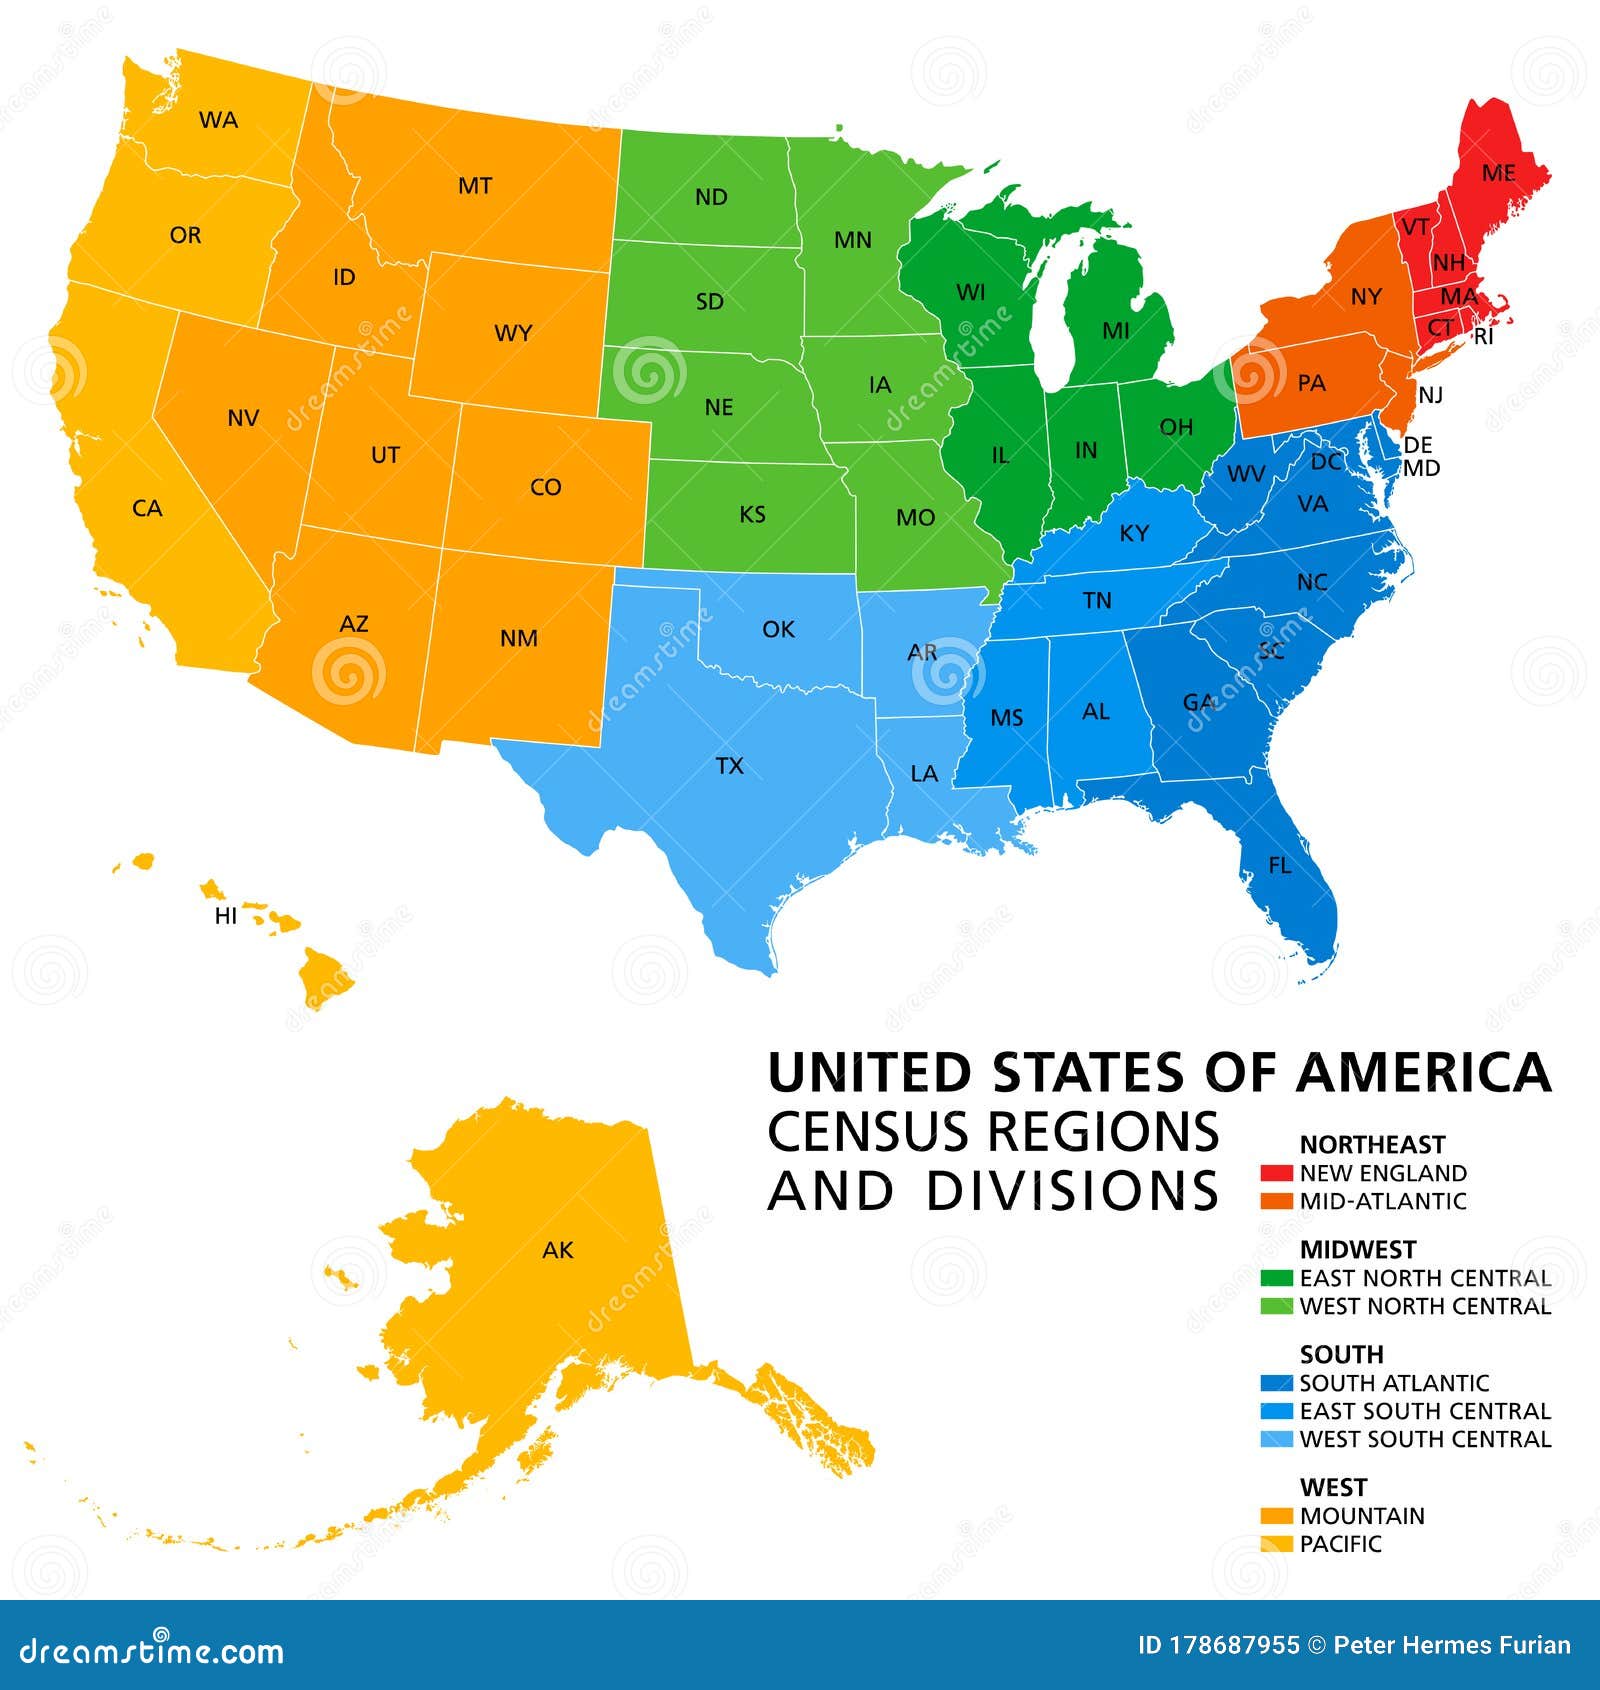 united states, census regions and divisions, political map